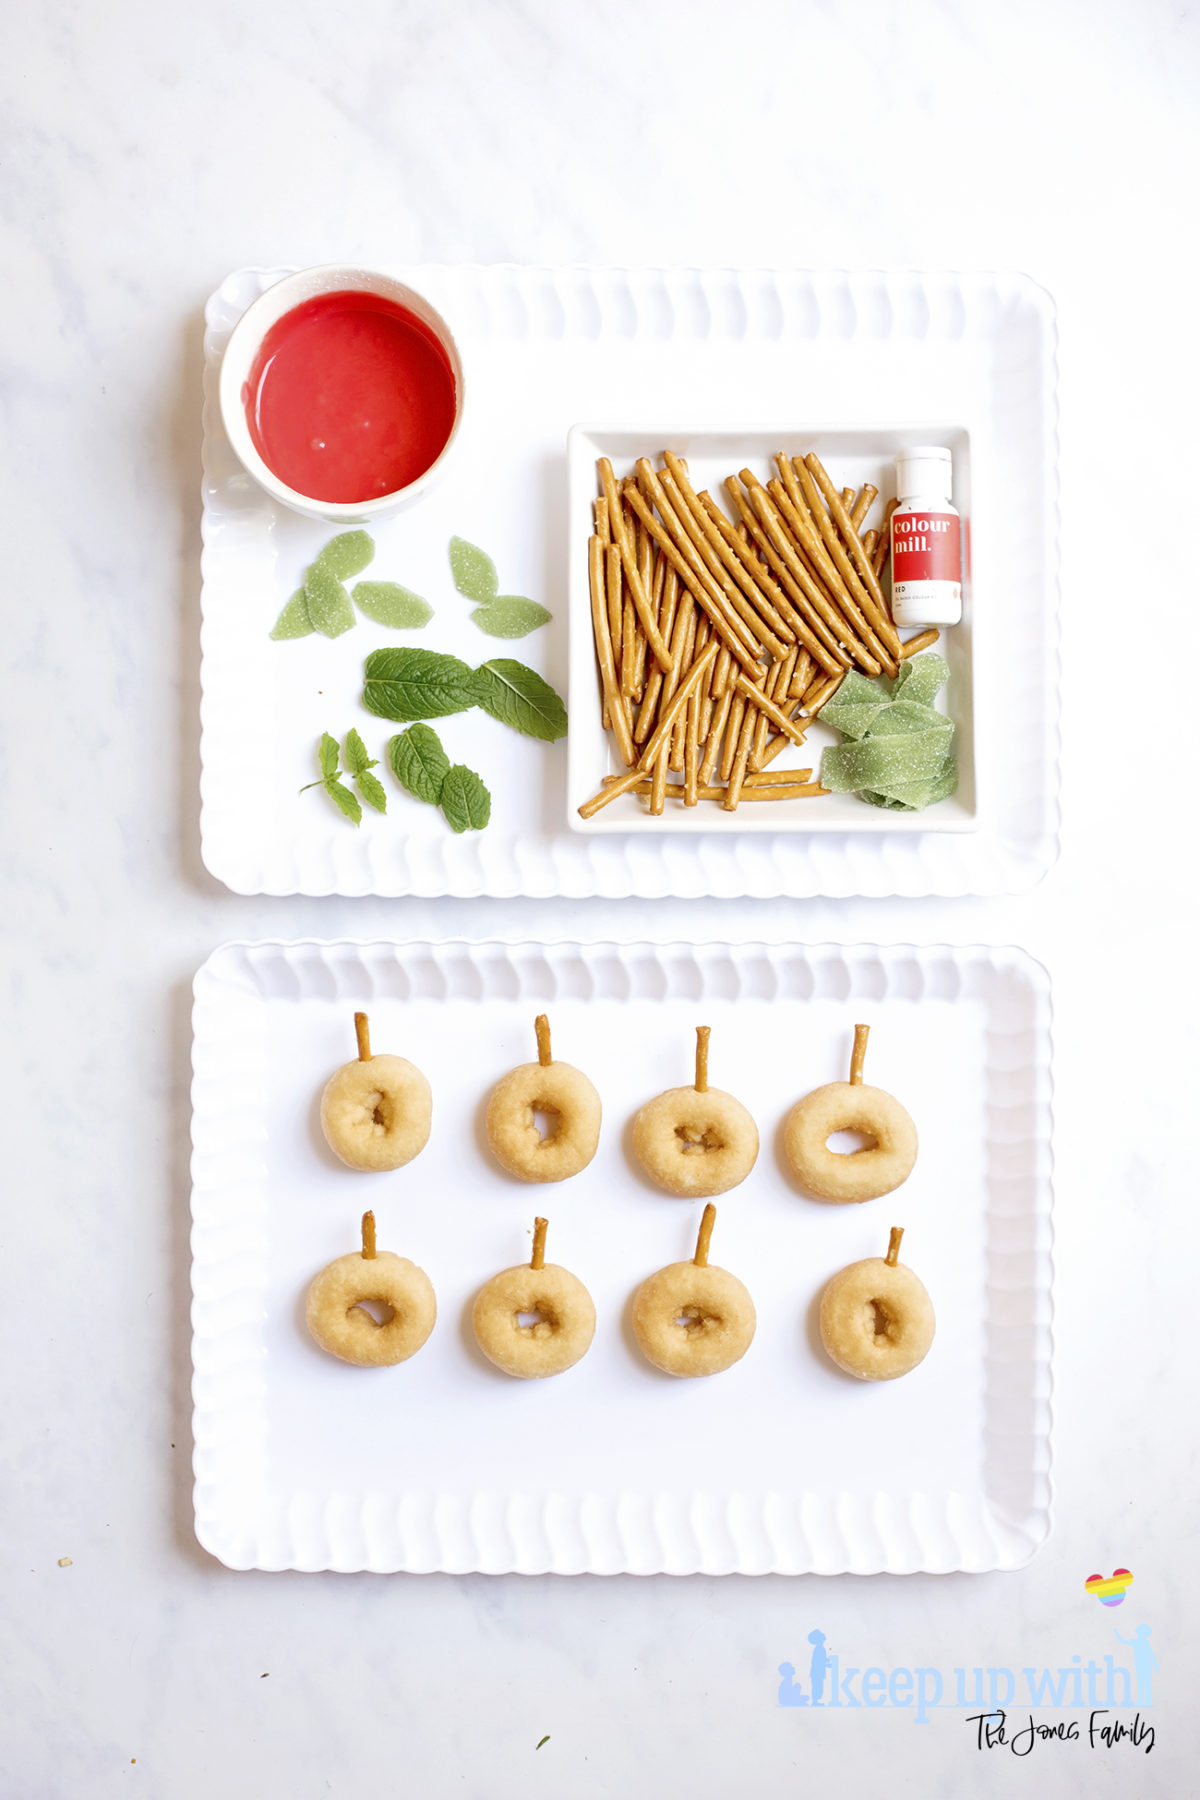 Image shows ingredients for Back to School Doughnuts on a white scalloped tray, sitting on a white marble surface. There are mini doughnuts, pretzel sticks, green fizzy belt sweets, mint leaves, red oil based food colouring and a bowl of icing sugar coloured red. Beneath the tray is a second tray with the mini donuts prepared with pretzel stalks in. Image by Sara-Jayne from Keep Up With The Jones Family.